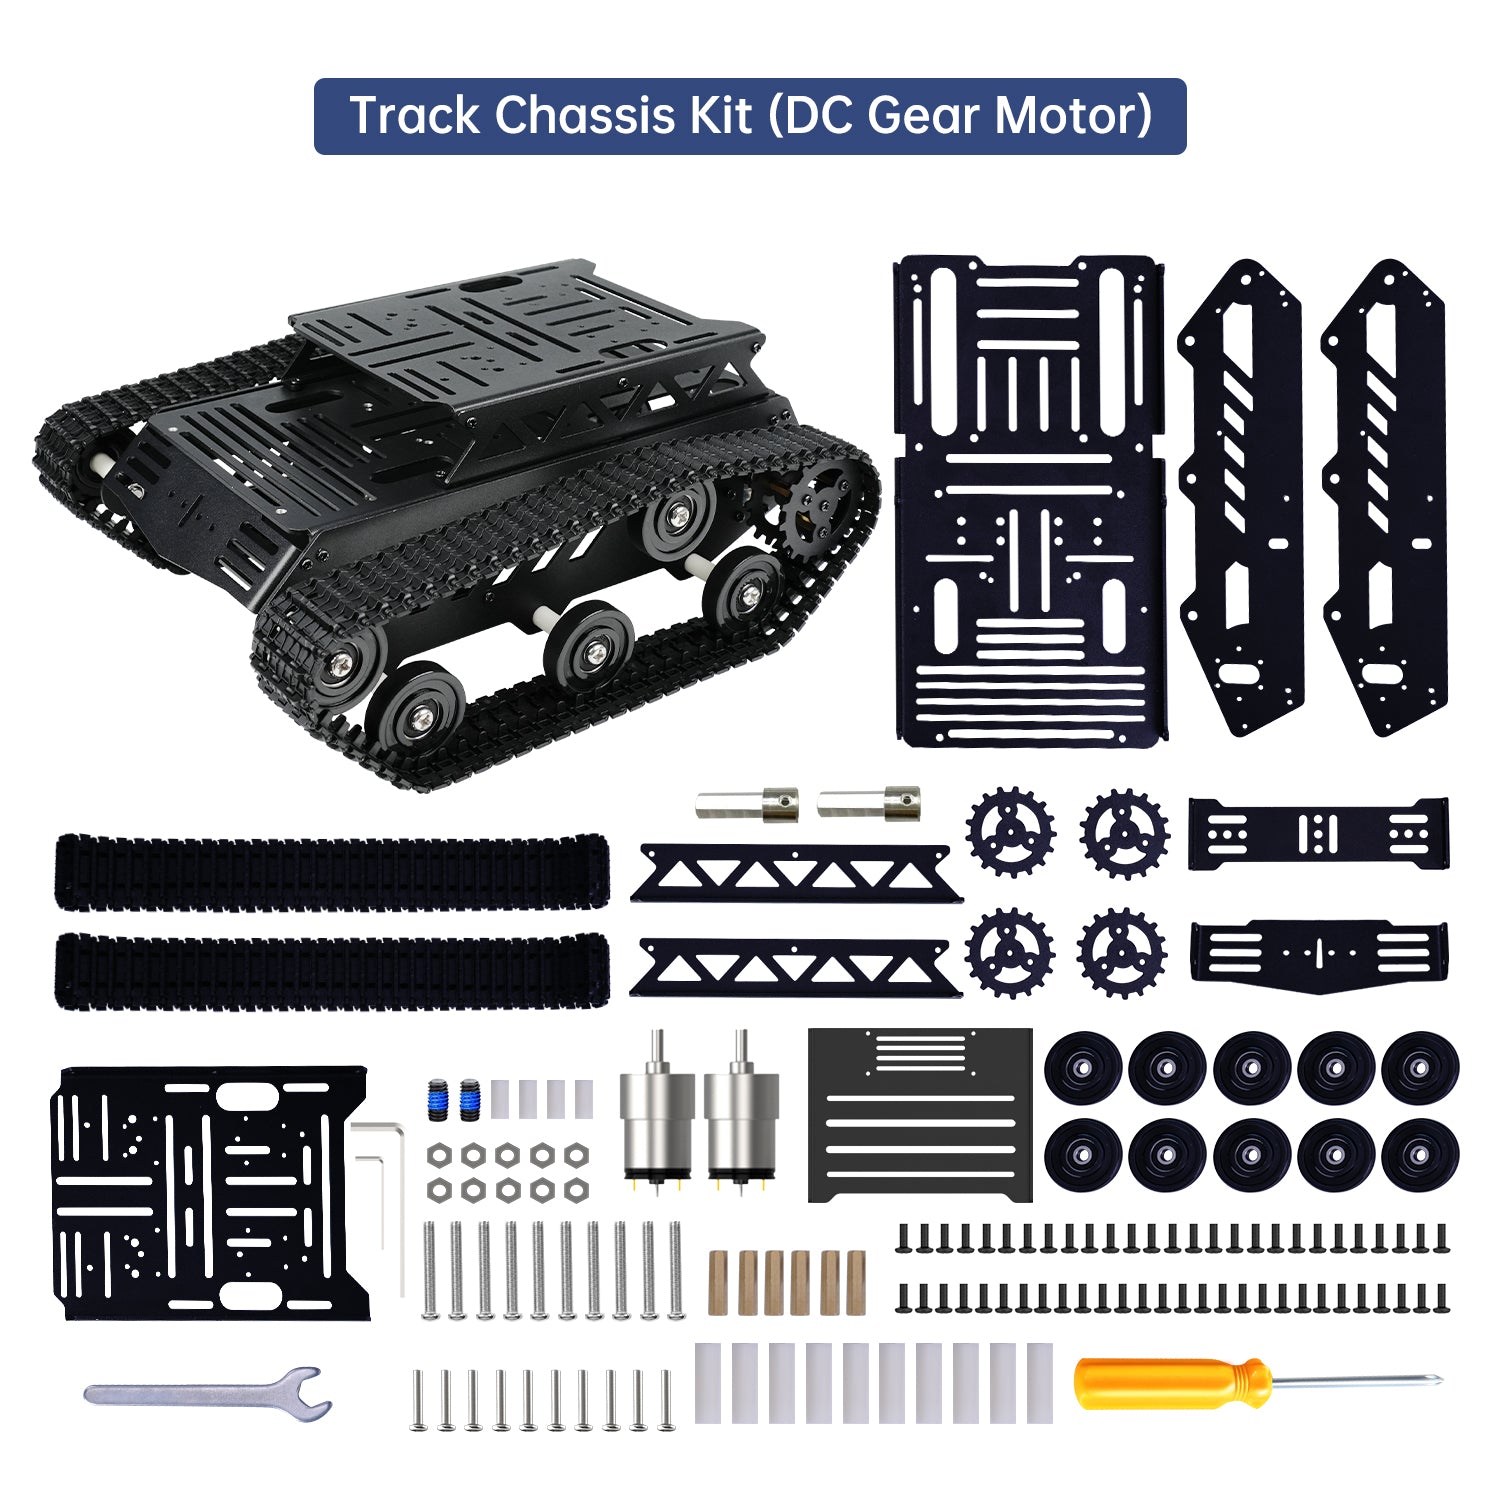 Hiwonder Tank Car Chassis Kit Shock Absorbing Robot with DC Geared Motor for Arduino/ Raspberry Pi/ Jetson Nano DIY Robotic Car Learning Kit (Black)